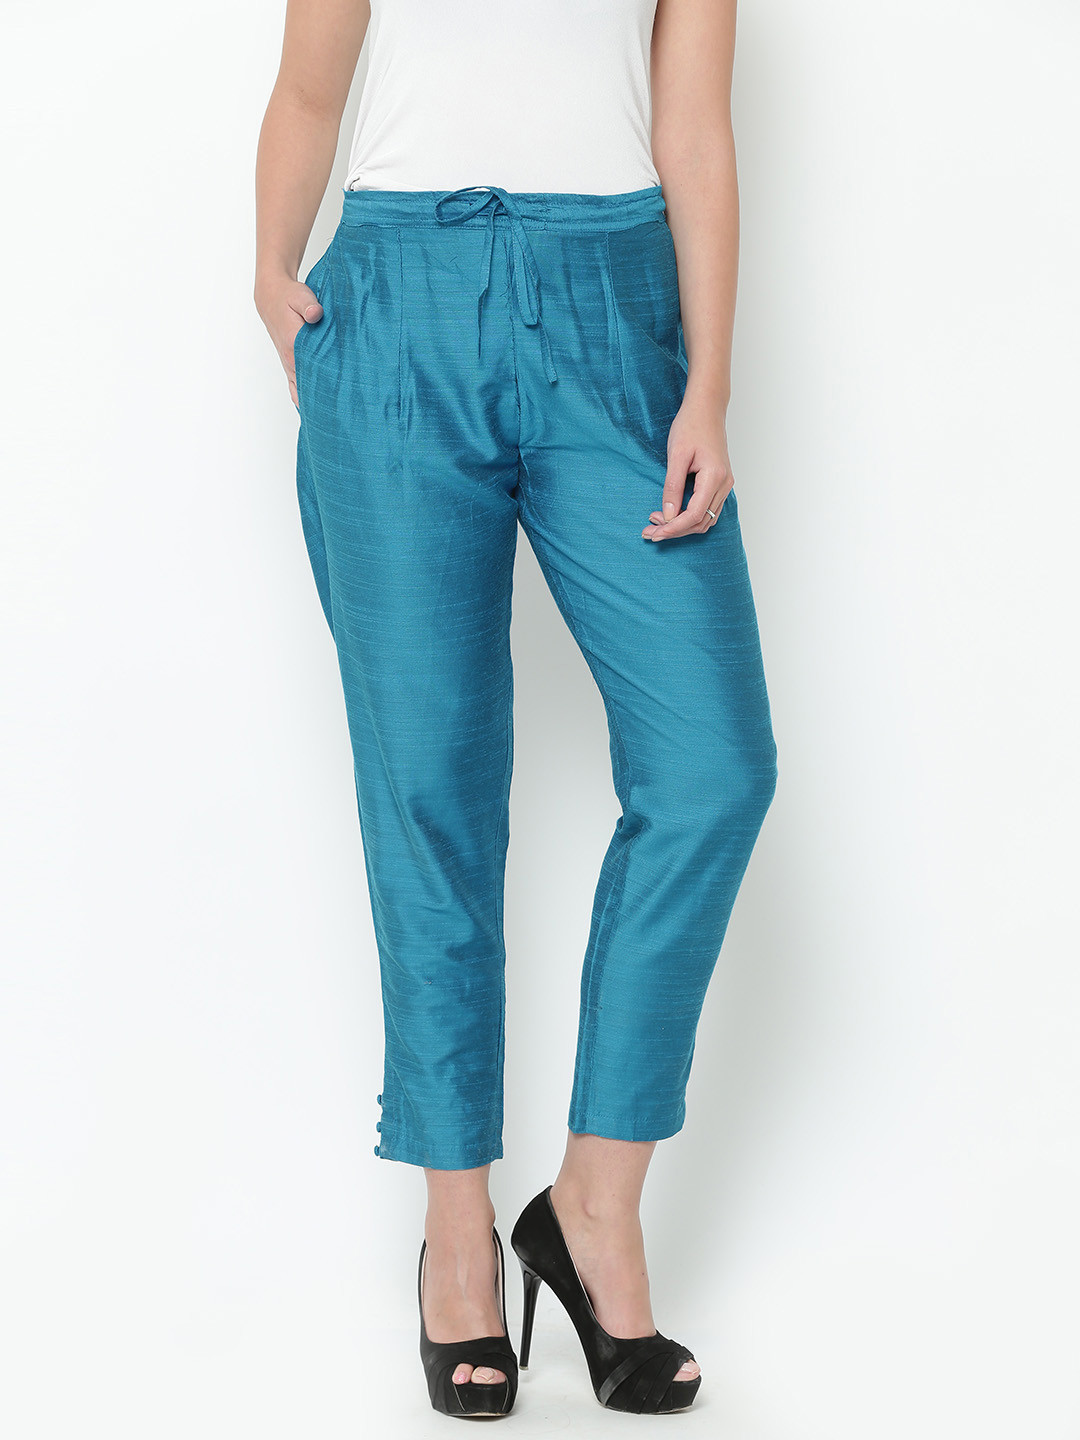 Buy Shree Women Turquoise Dupion Solid Trouser At Best Price in India ...